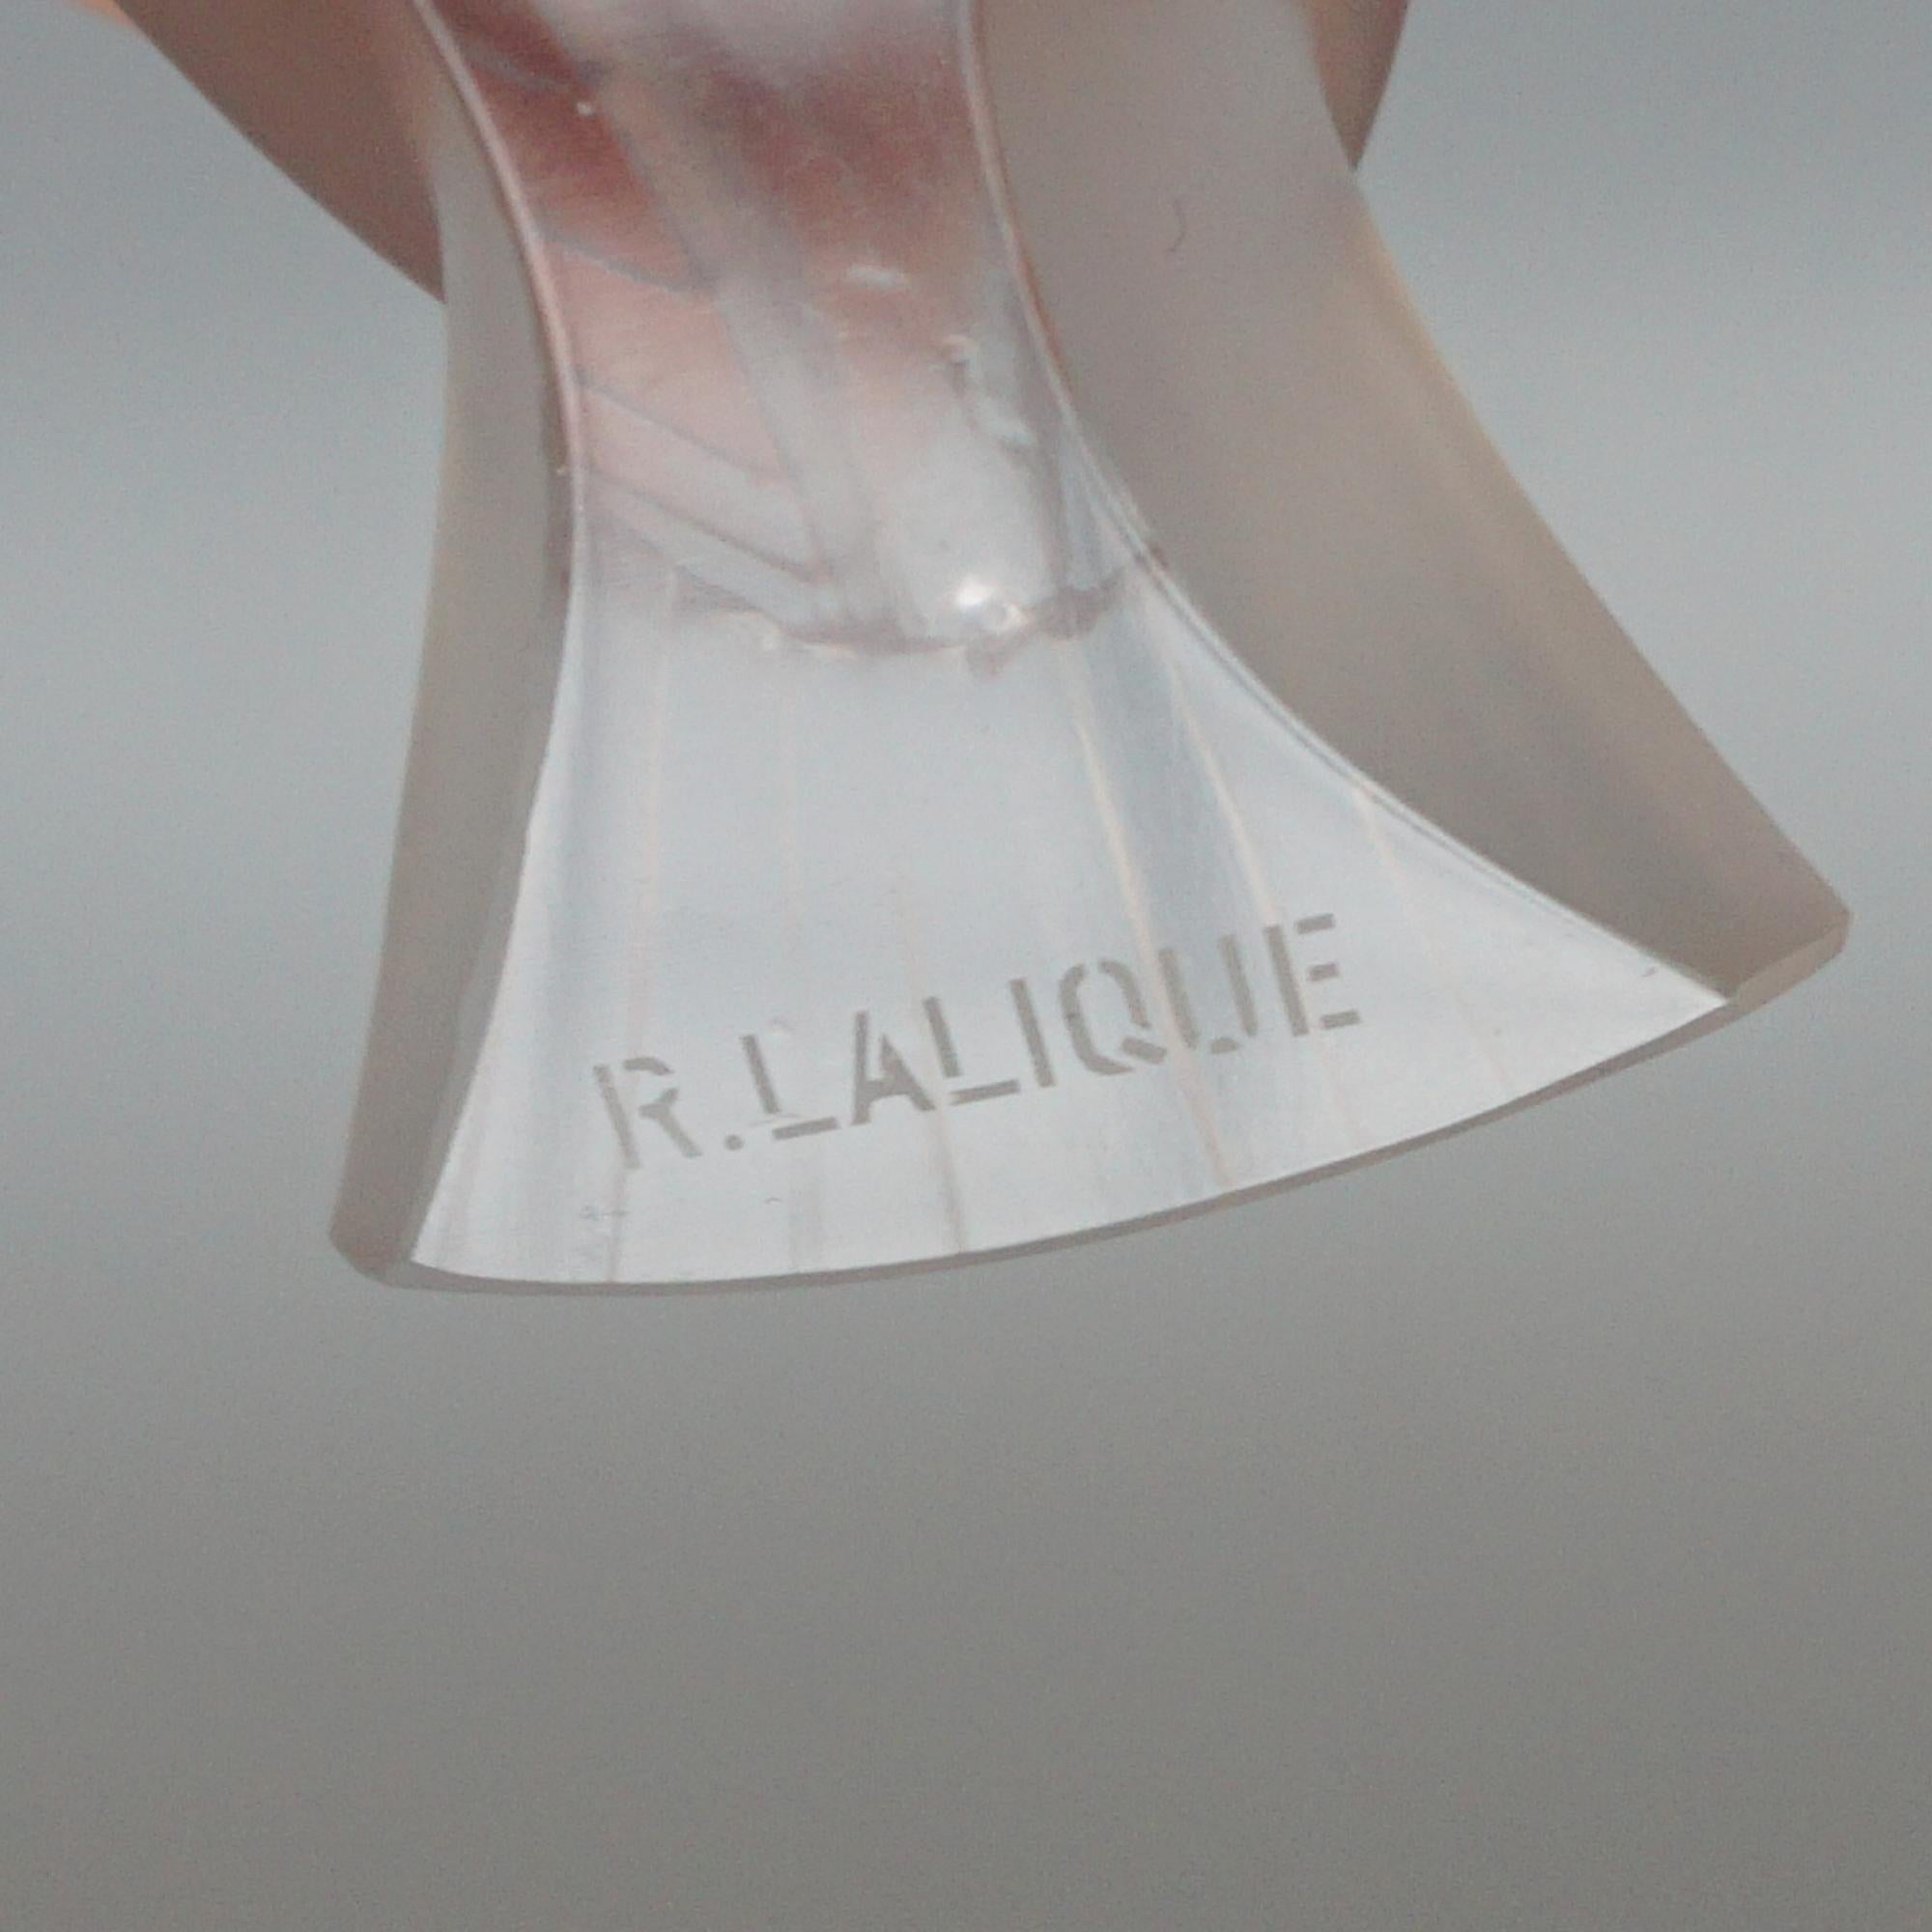 'Moineau Fier' Rene Lalique Glass Paperweight  For Sale 2